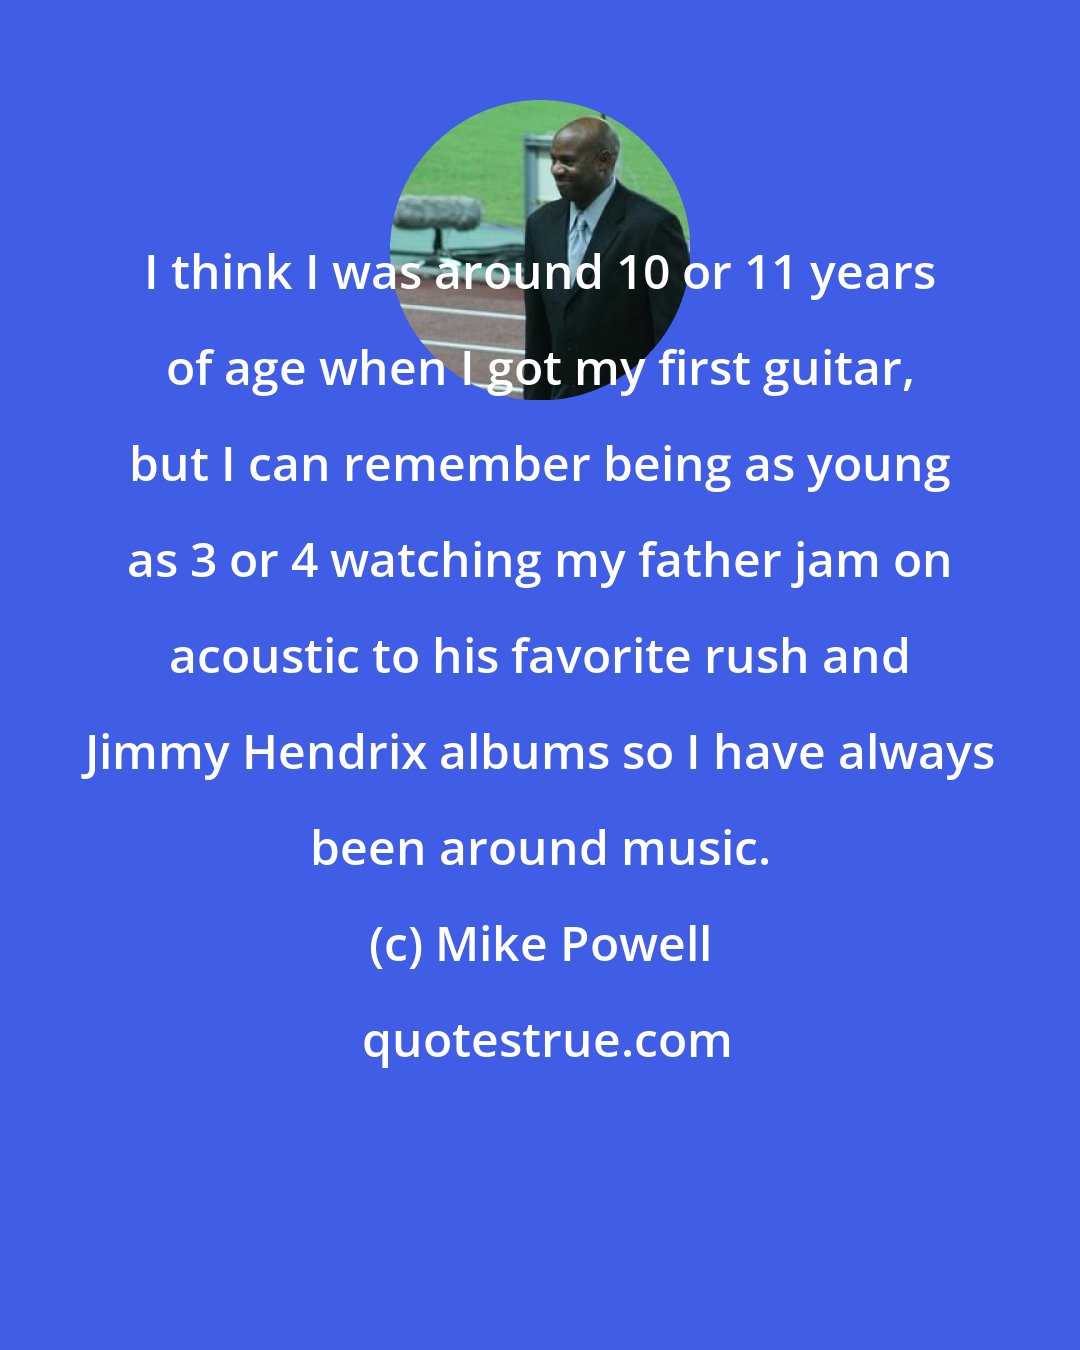 Mike Powell: I think I was around 10 or 11 years of age when I got my first guitar, but I can remember being as young as 3 or 4 watching my father jam on acoustic to his favorite rush and Jimmy Hendrix albums so I have always been around music.